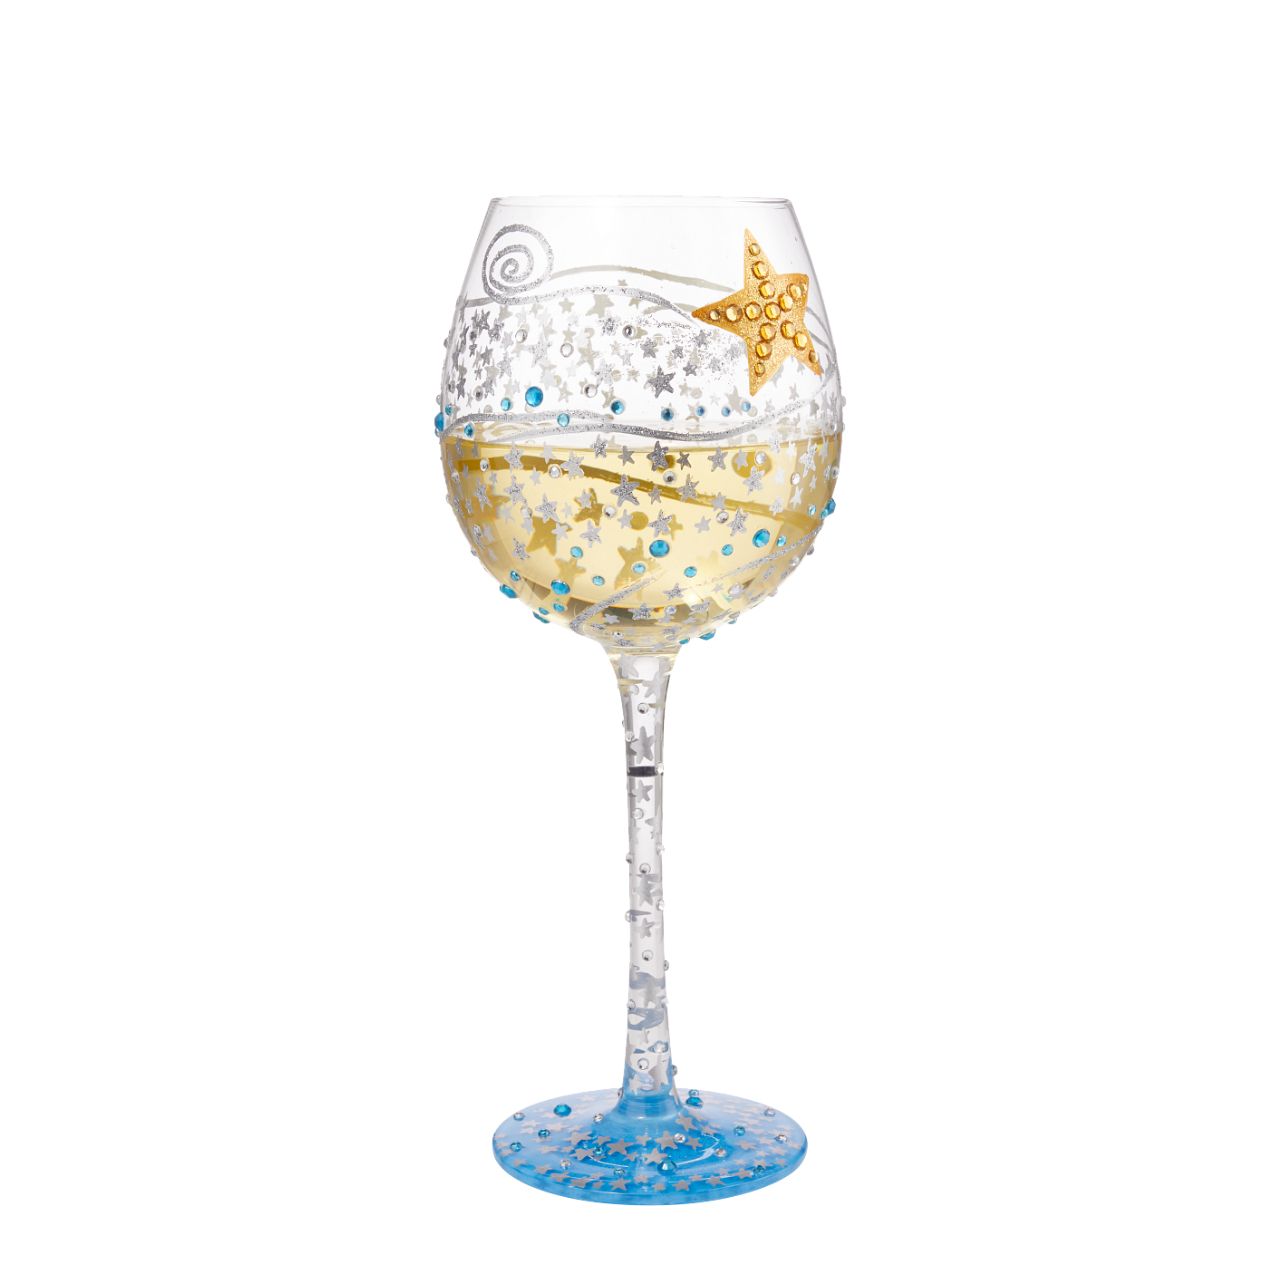 You're the Brightest Star Superbling Glass by Lolita  Some people come into our lives at our darkest time and bring with them enough light to steer us right. For those who brighten your day or night, celebrate their kindness and sparkle with this bedazzled wine glass.